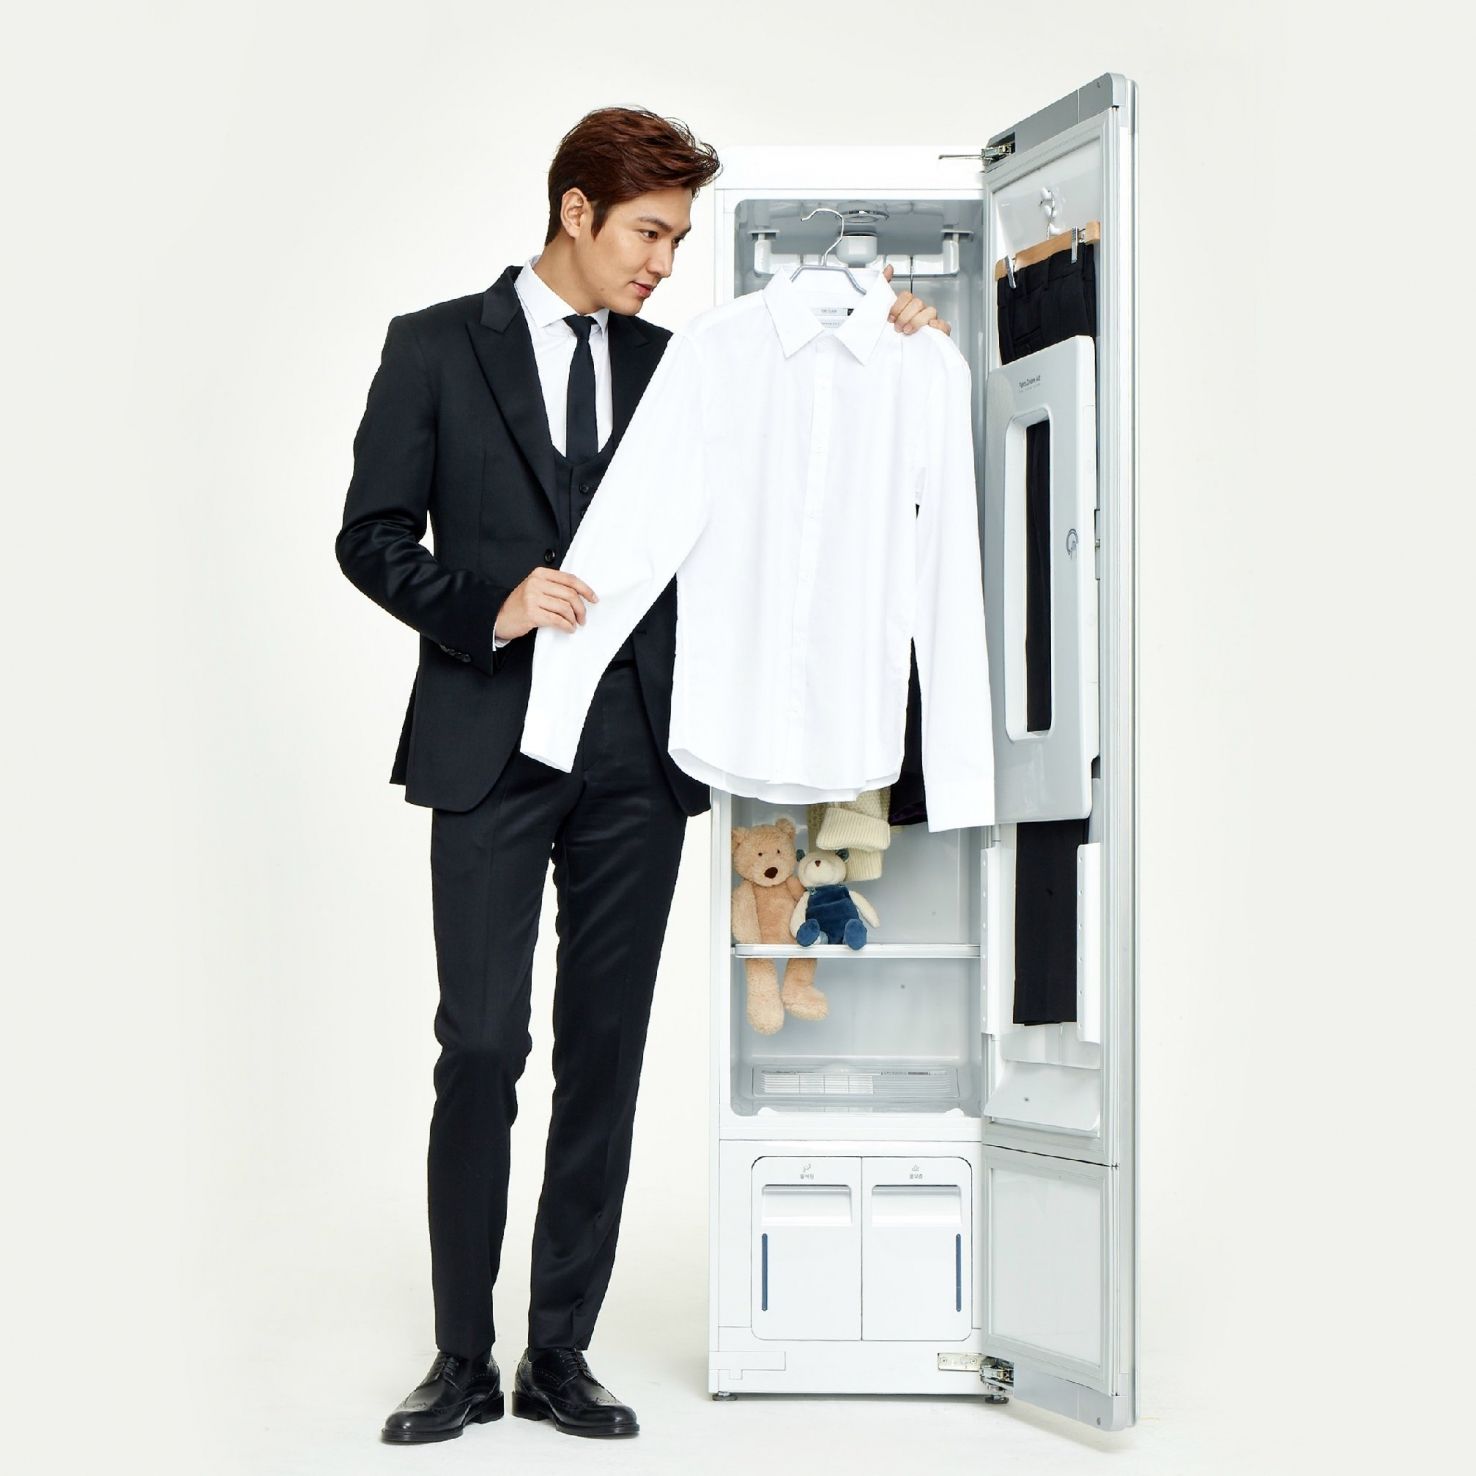 The LG Styler delivers fast, effective clothing care